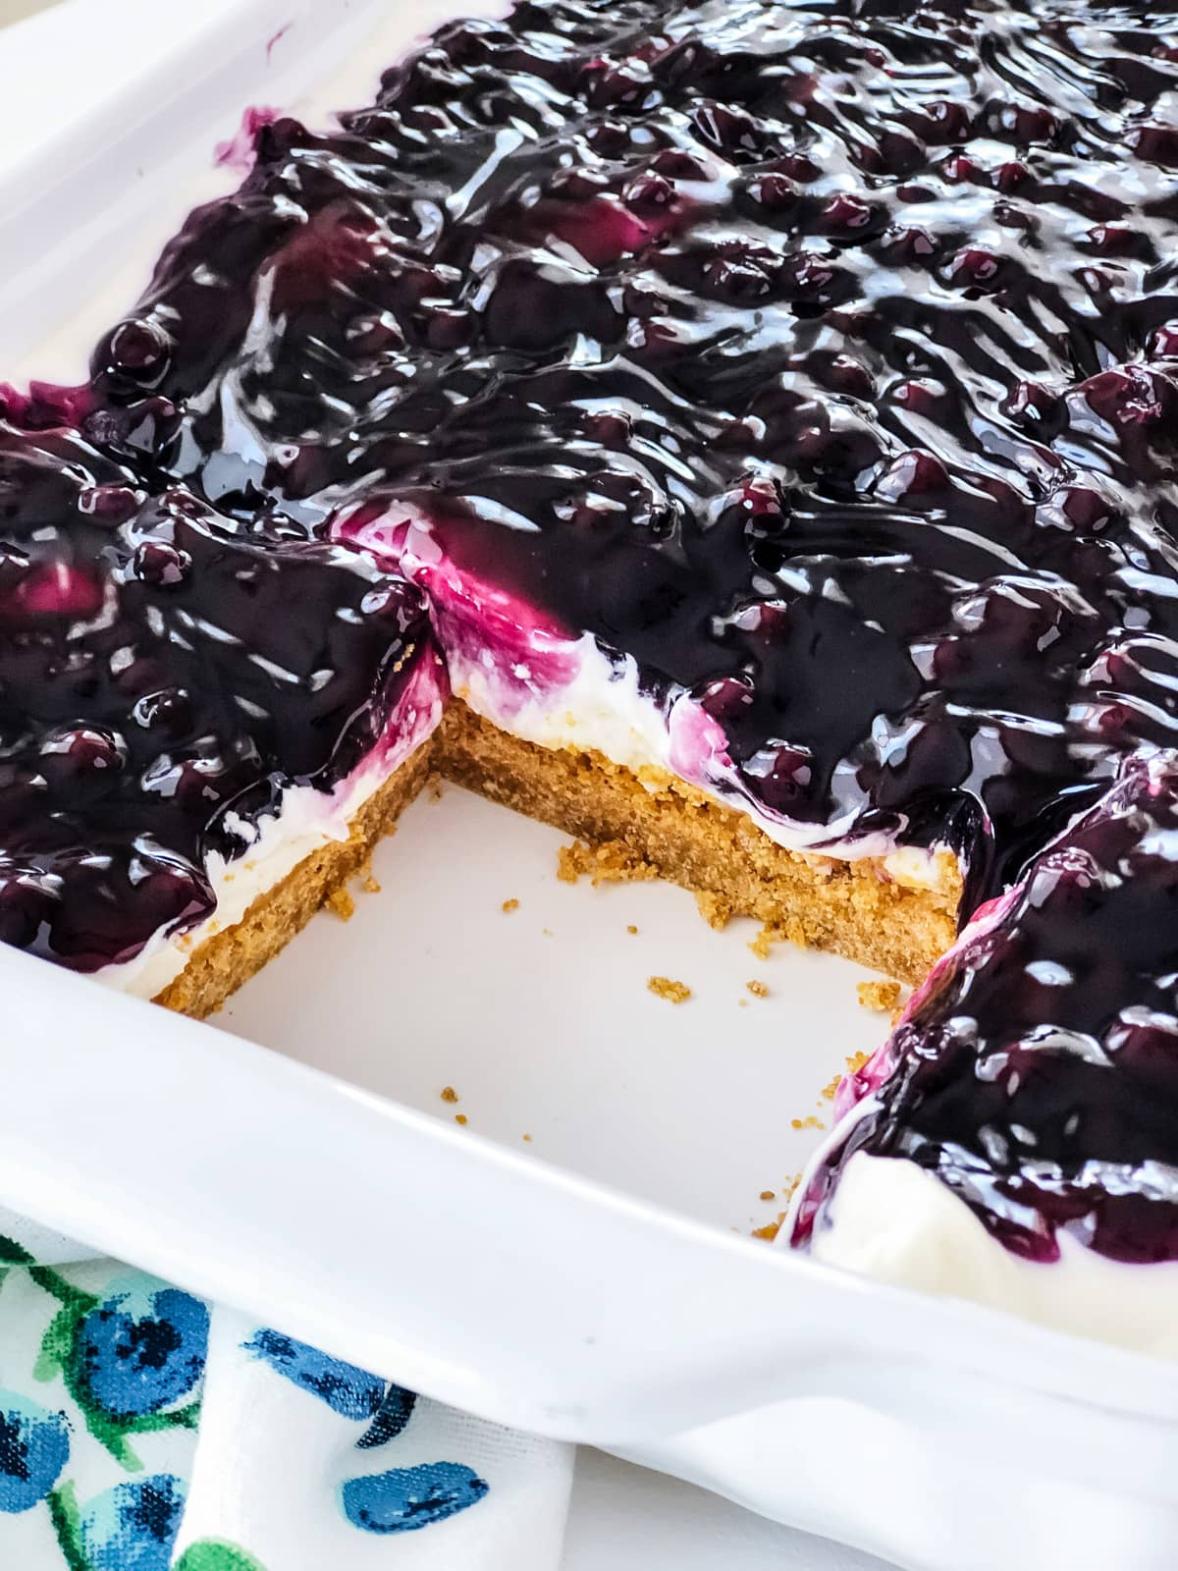 What Are Some Fun and Engaging Dessert Recipes That I Can Make With My Kids?